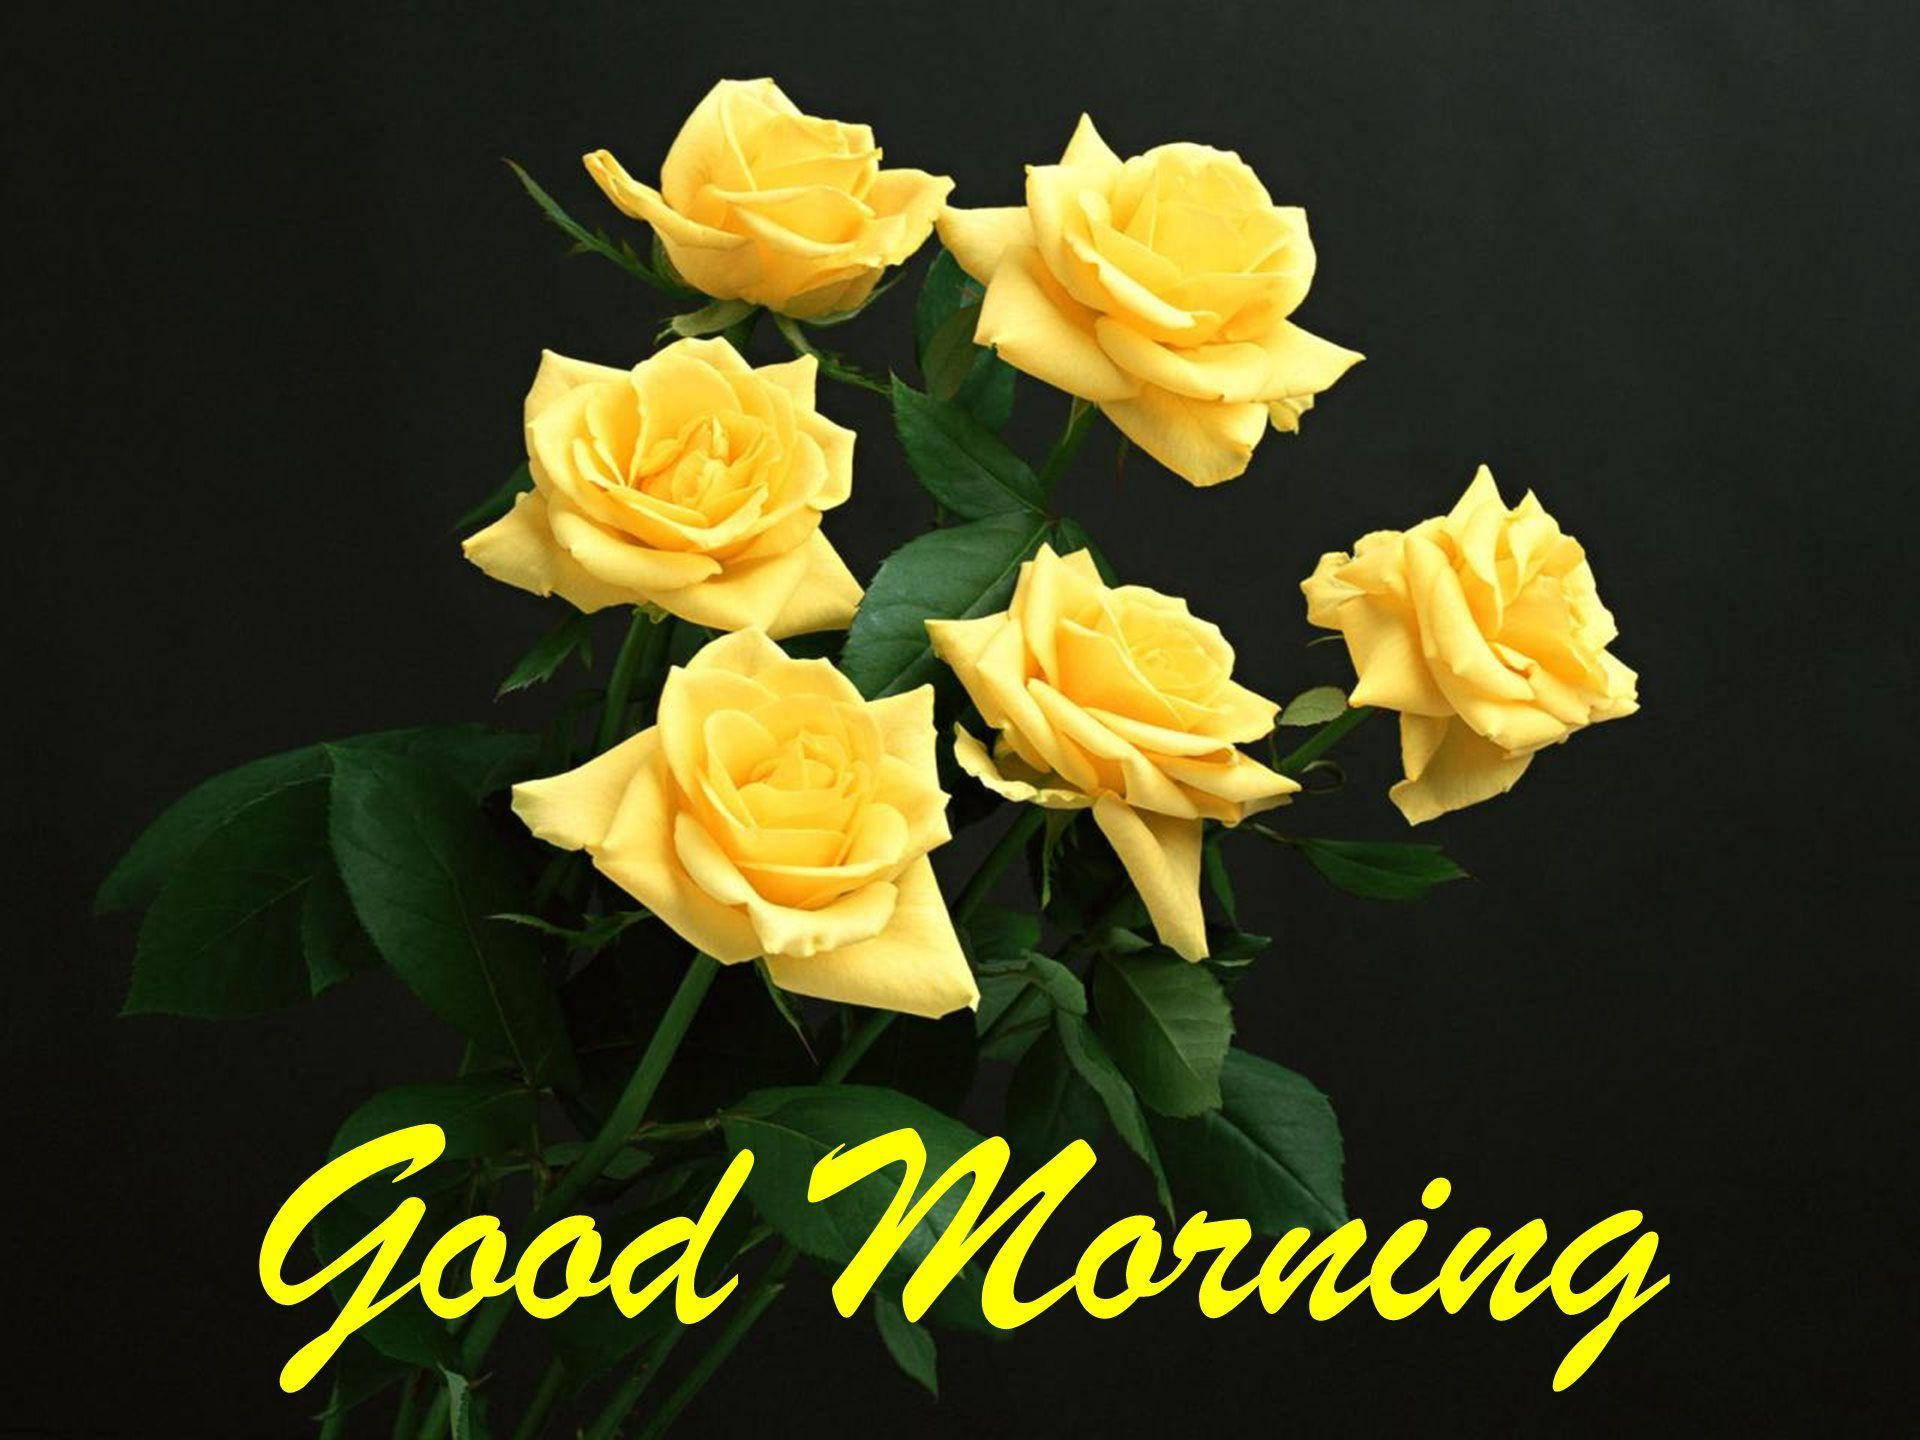 Good Morning Hd With Yellow Roses Background